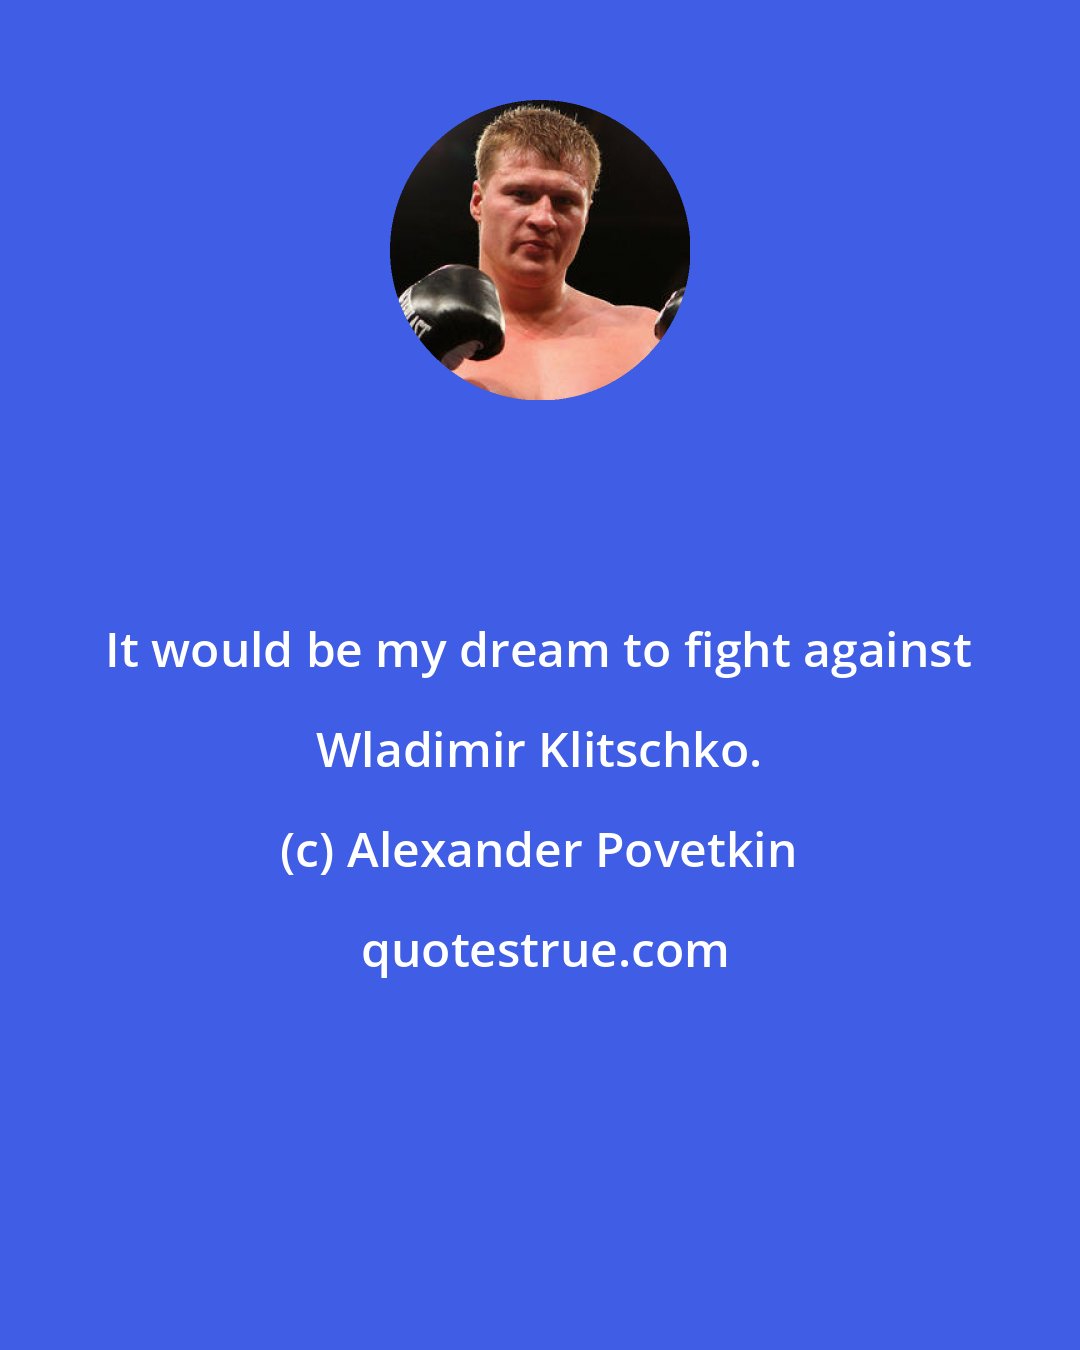 Alexander Povetkin: It would be my dream to fight against Wladimir Klitschko.